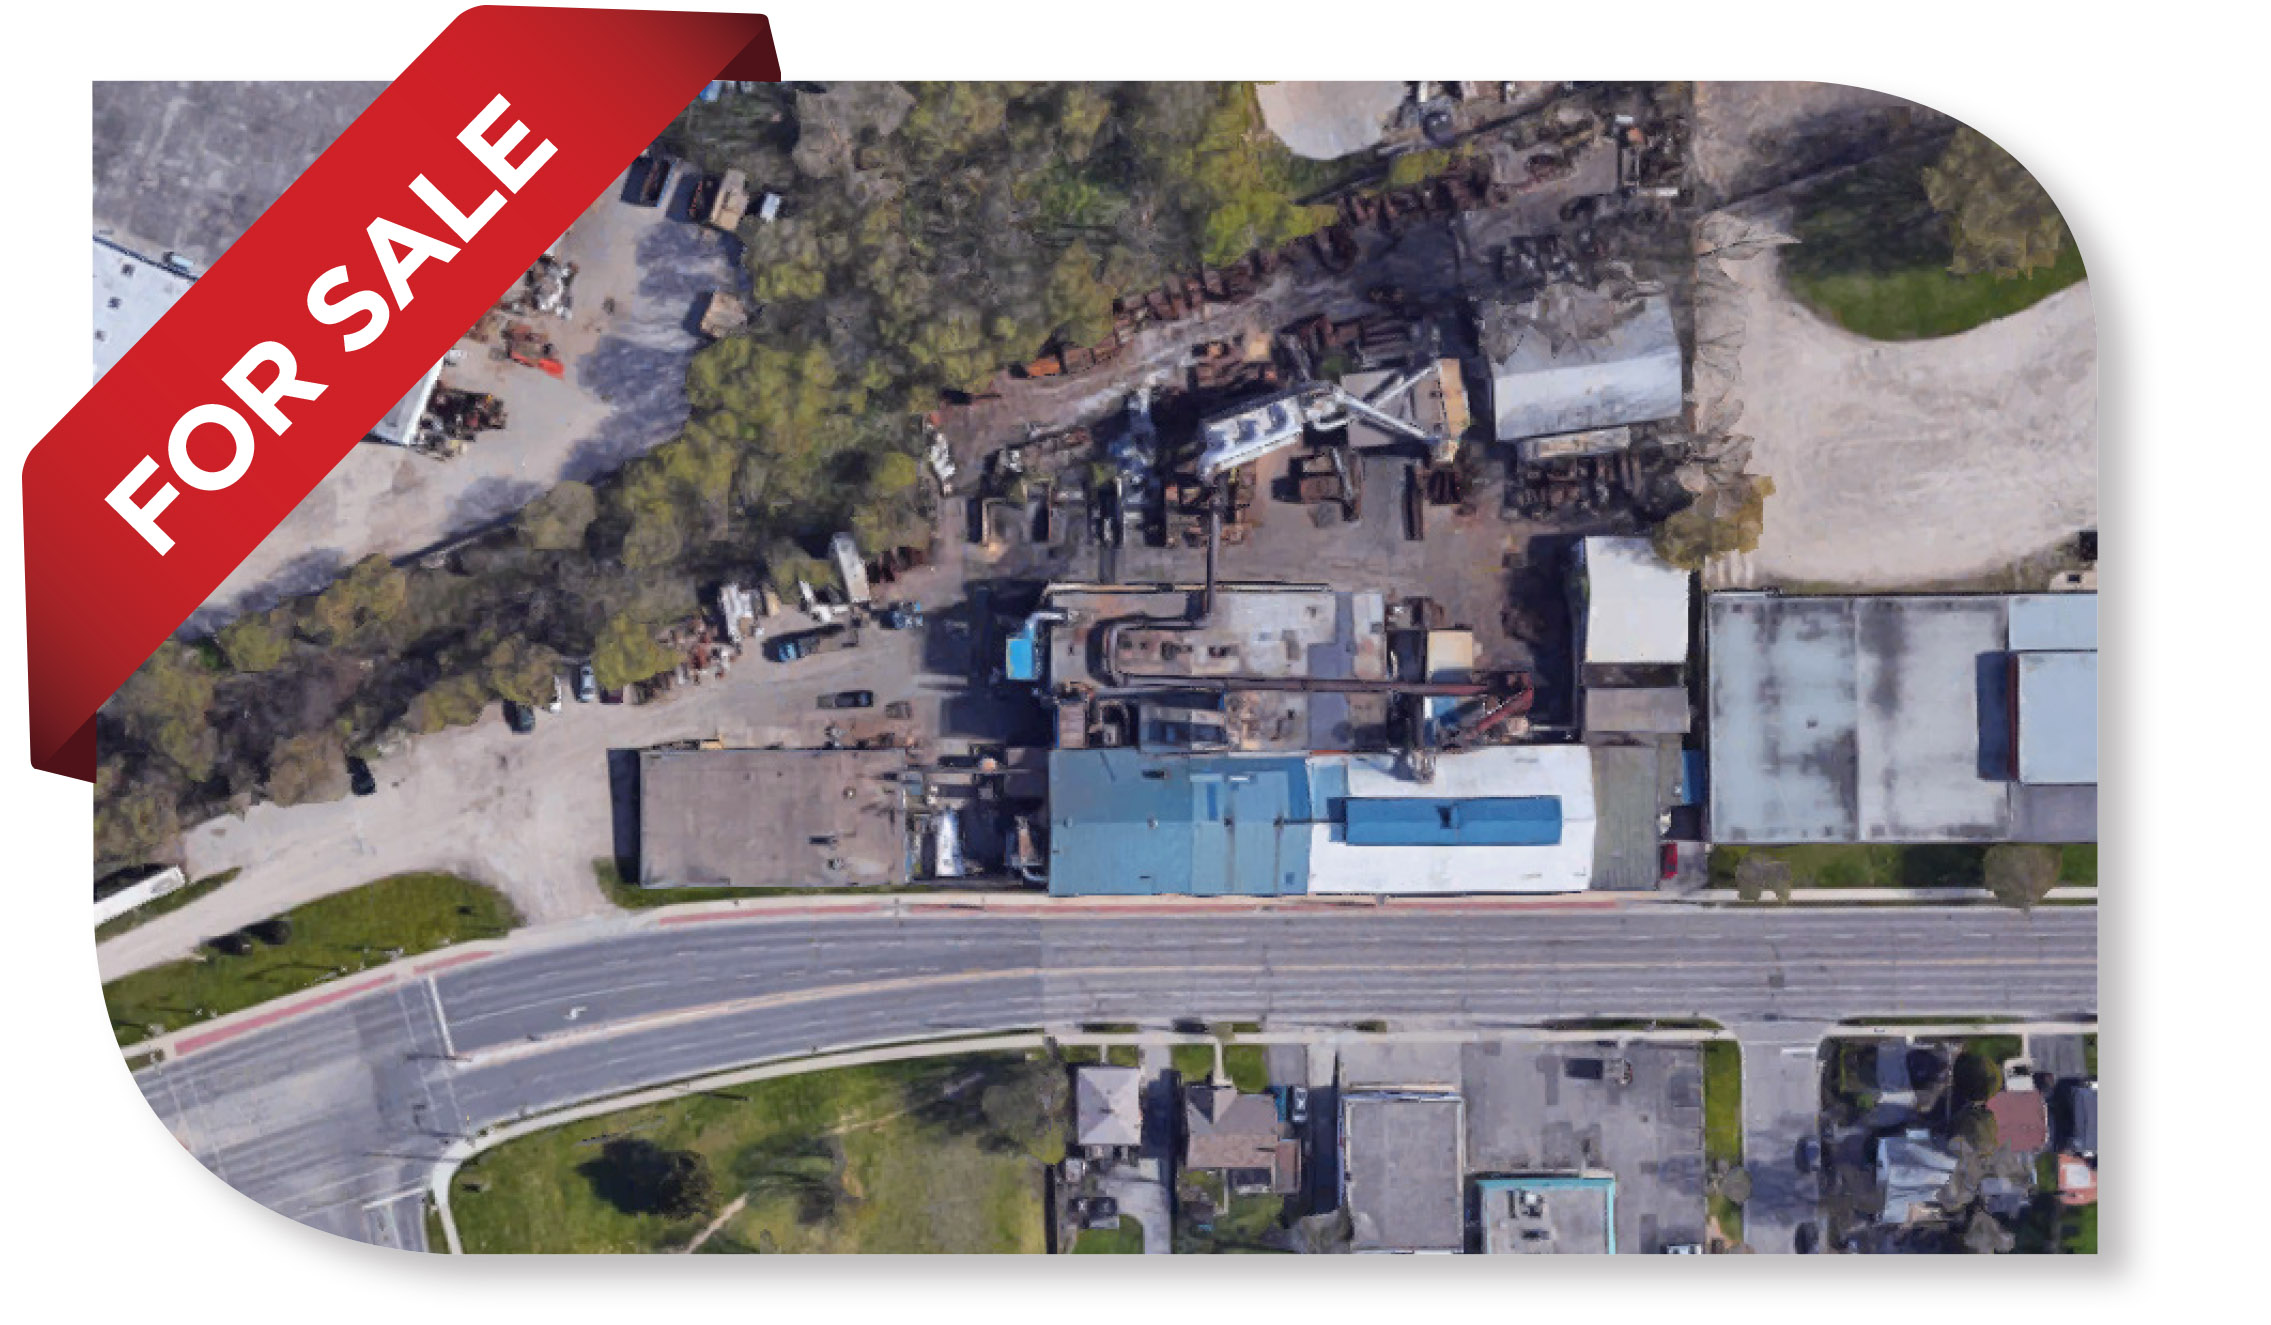 35,000 SF Industrial Building(s) on 3.6 acres